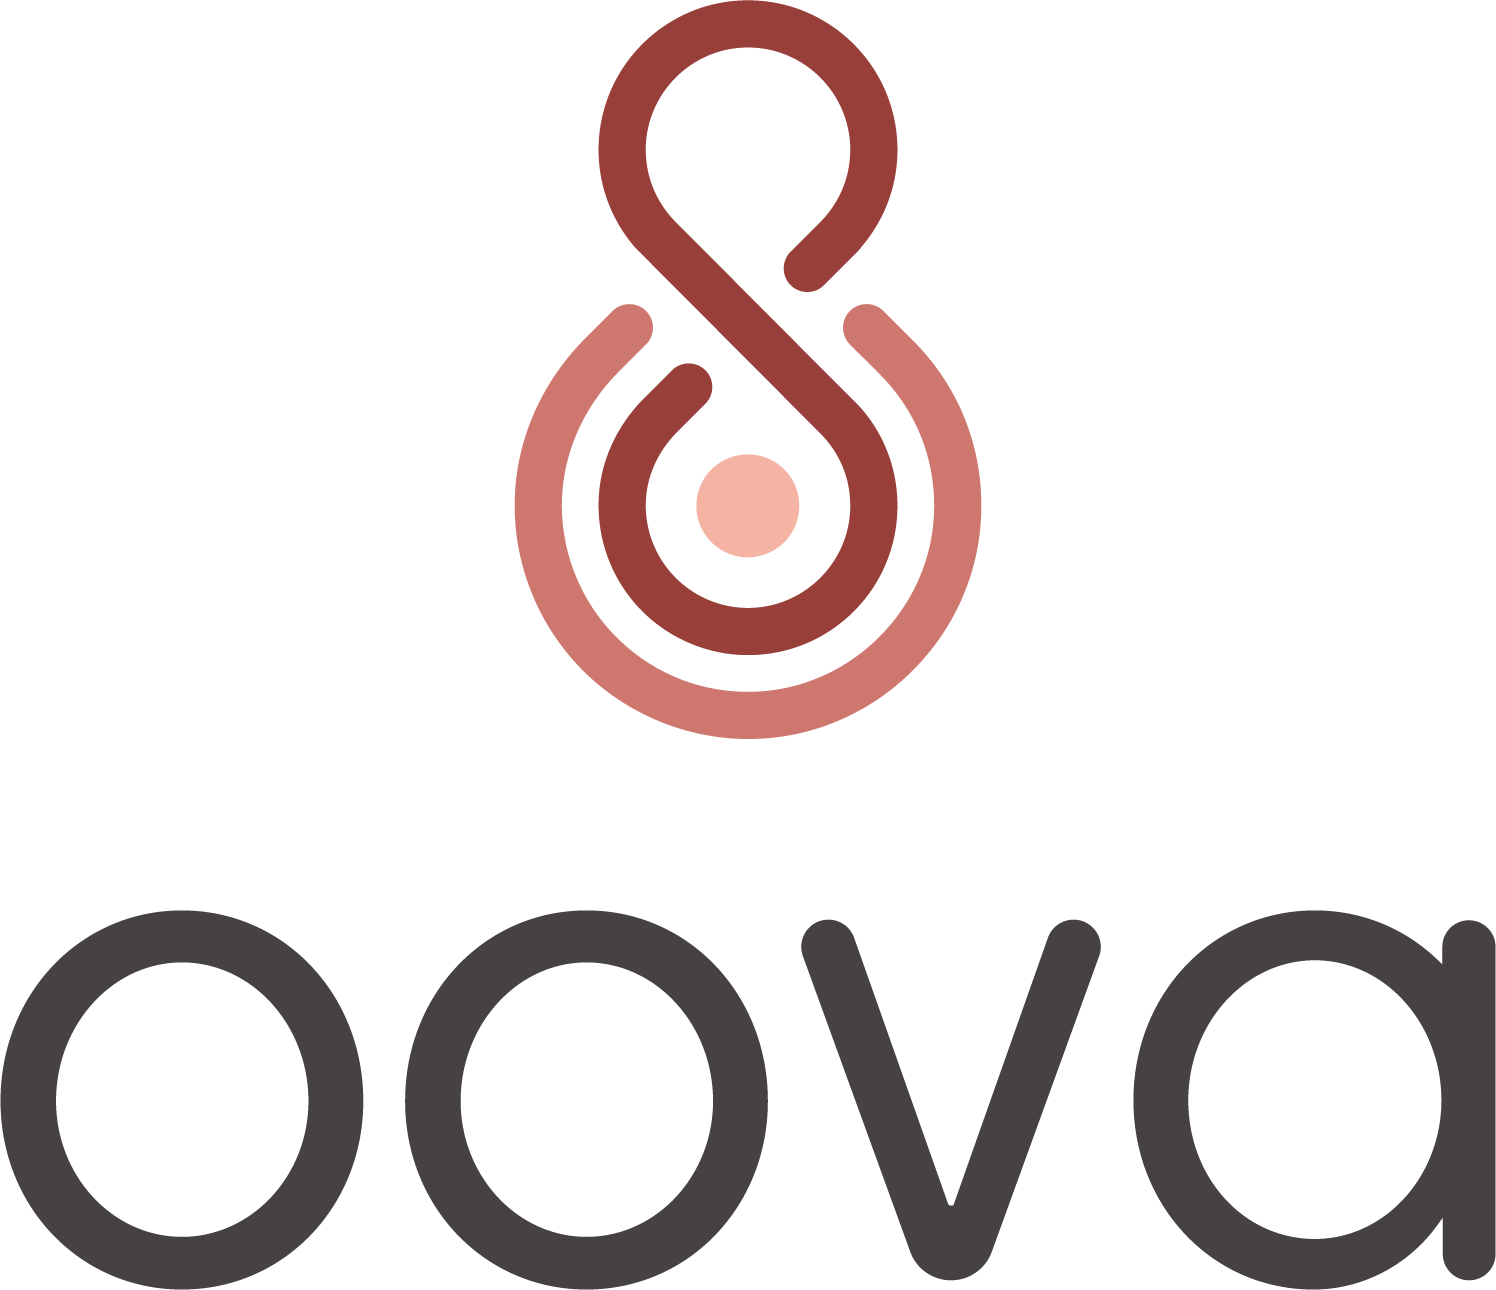 OOVA (Client)